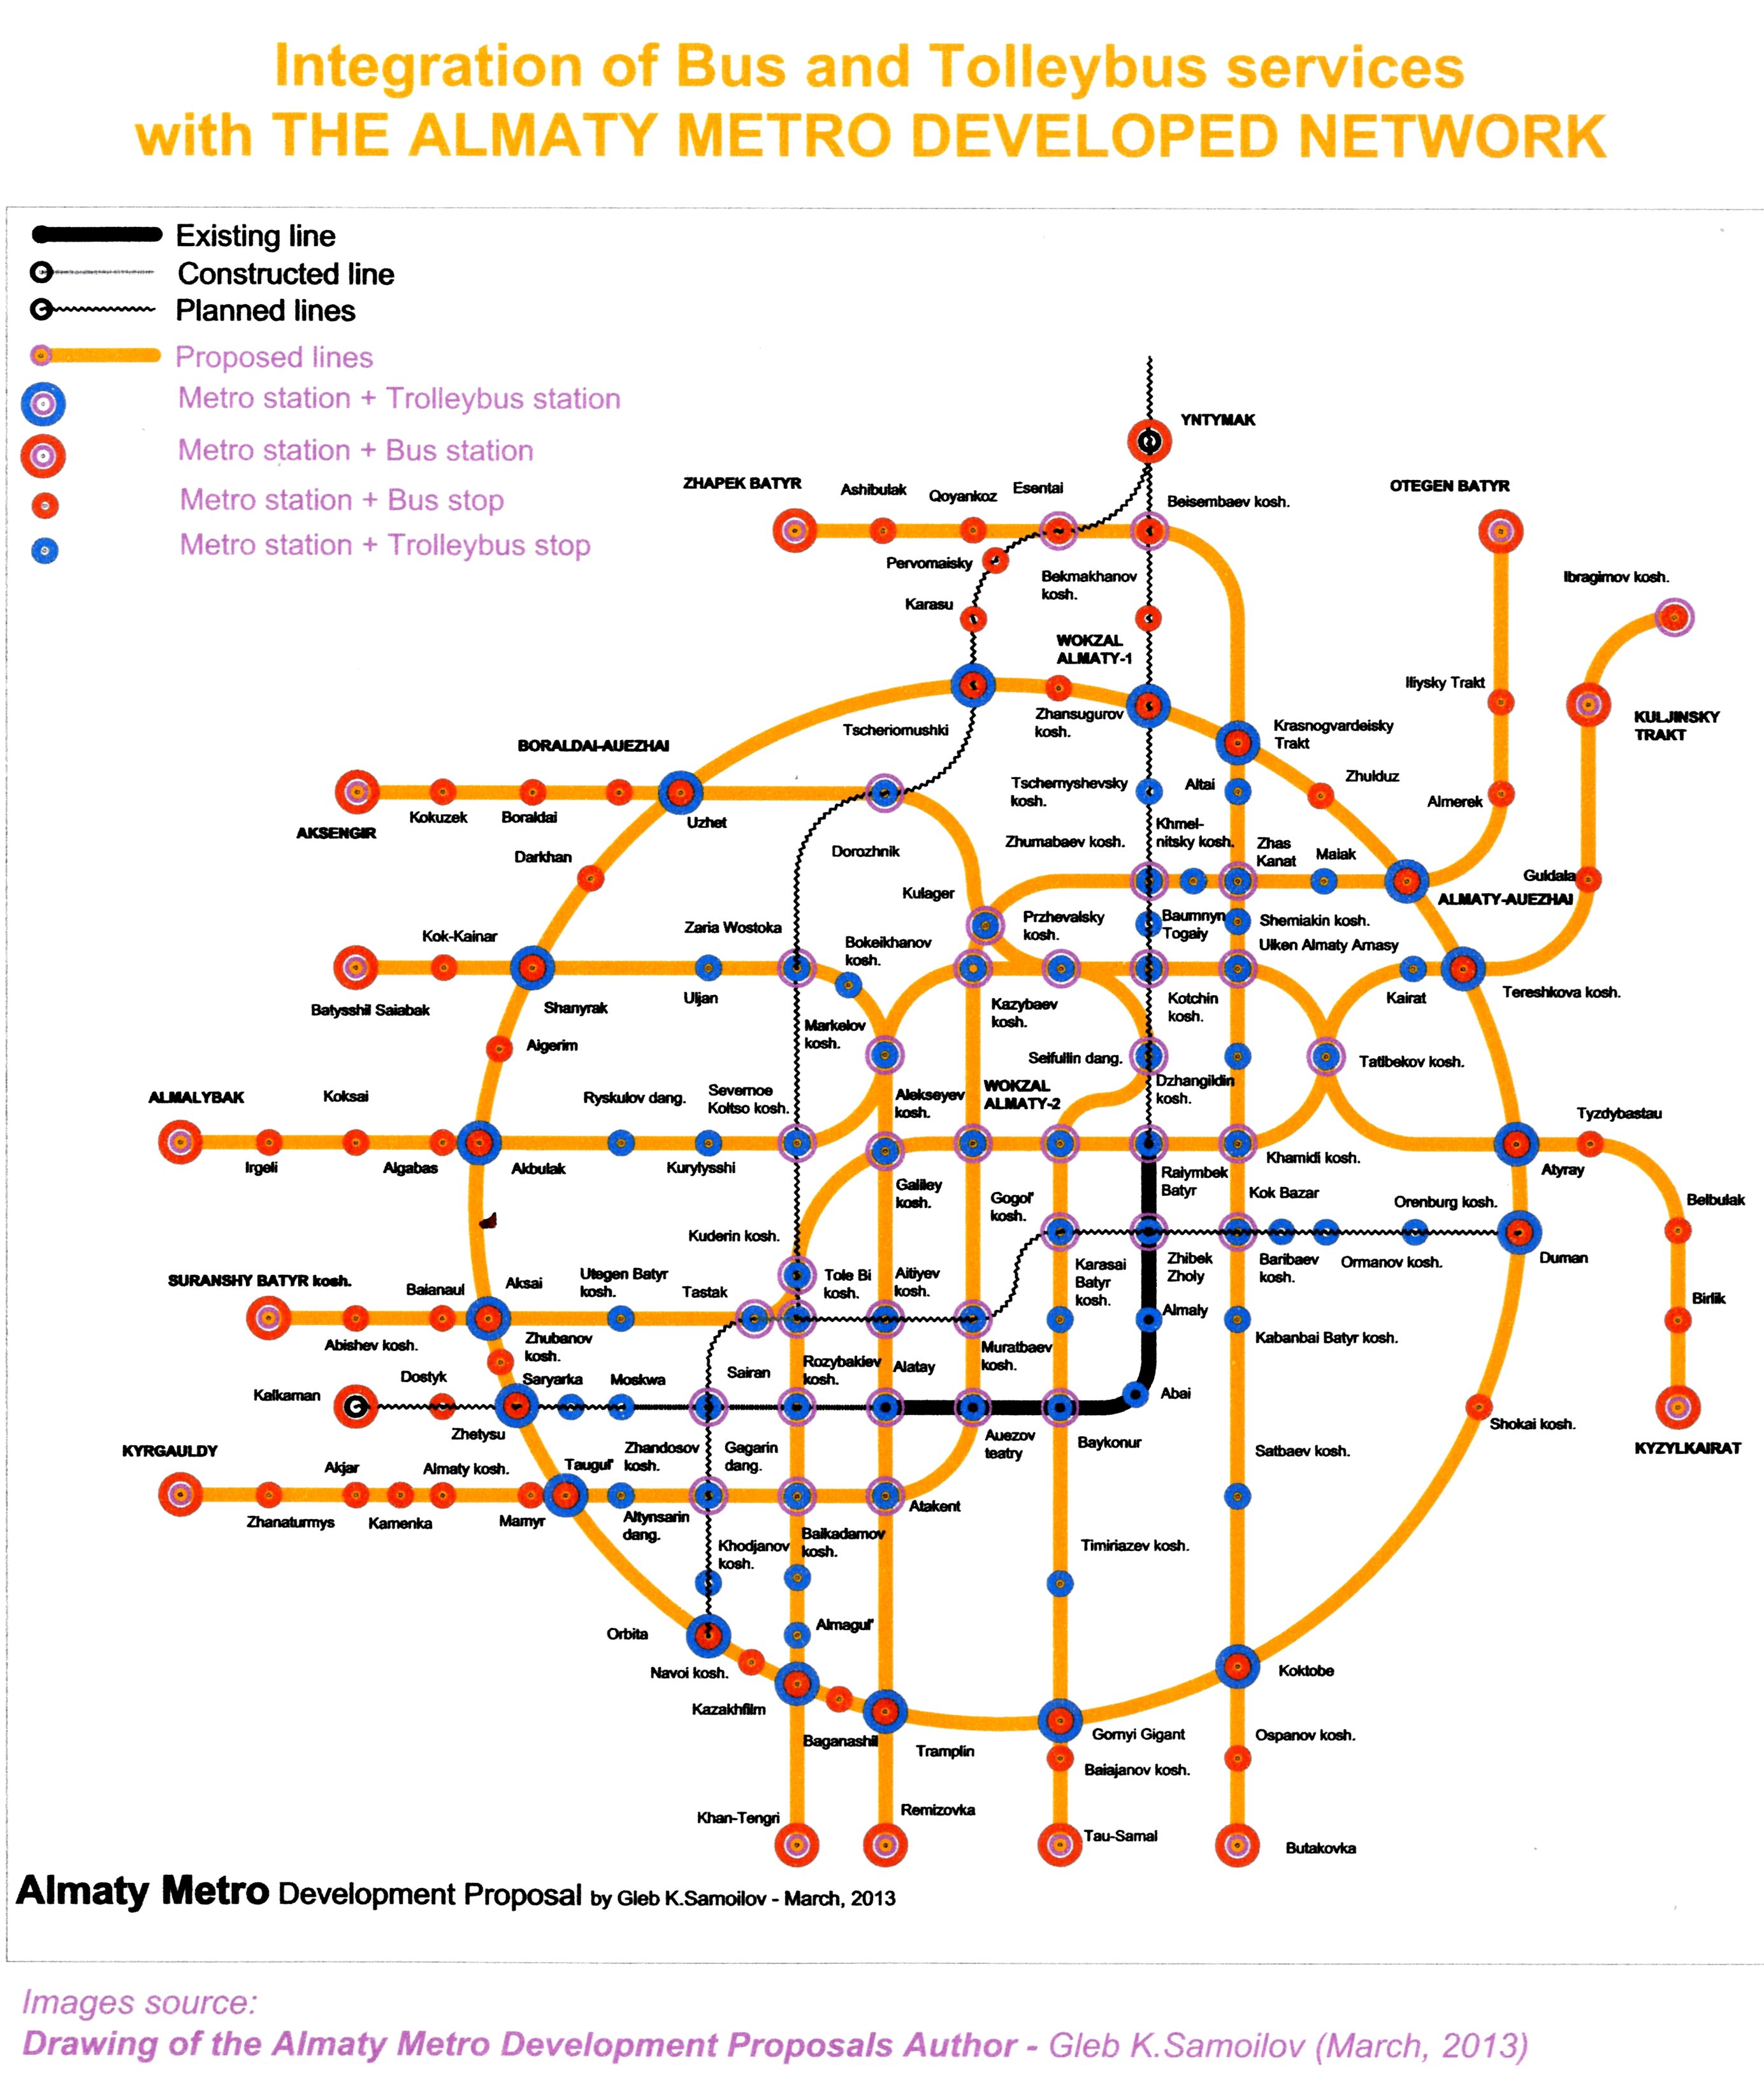 The Almaty Metro Integration with Bus and Trolleybus services